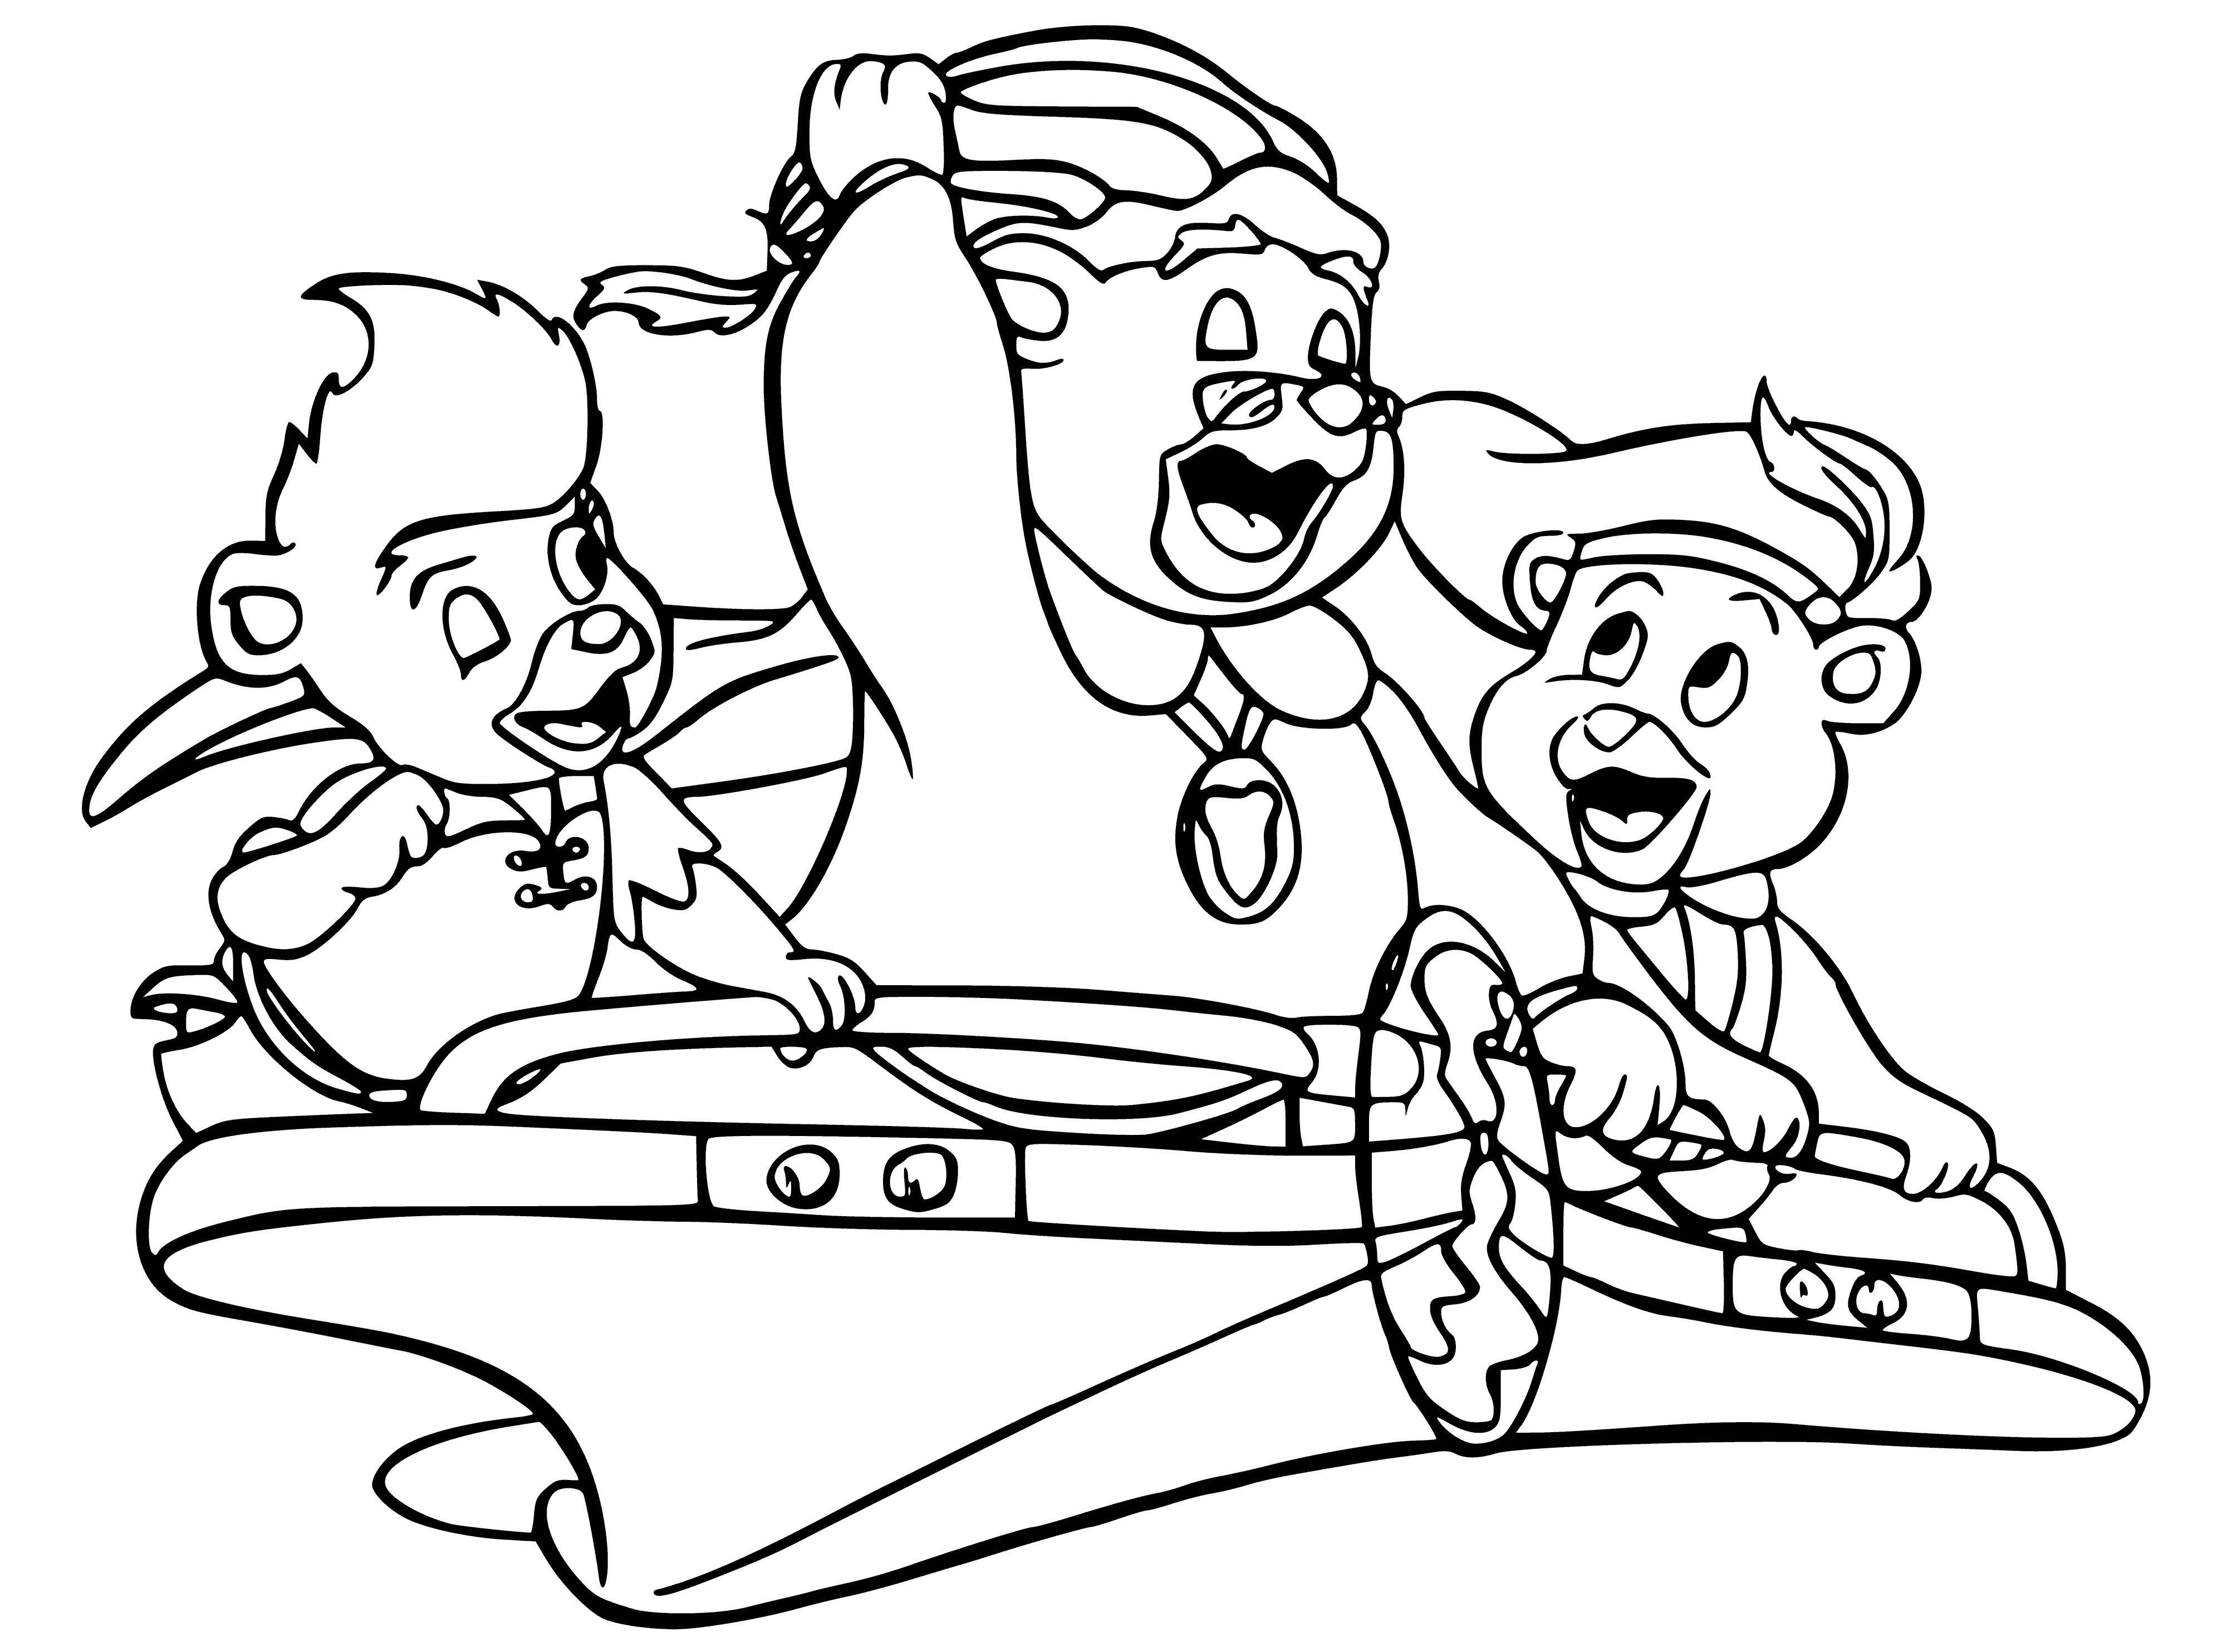 coloring page: Anthropomorphic bears living in a forest who wear no clothes and have large noses, each of a different color. They eat Gummi Berries.